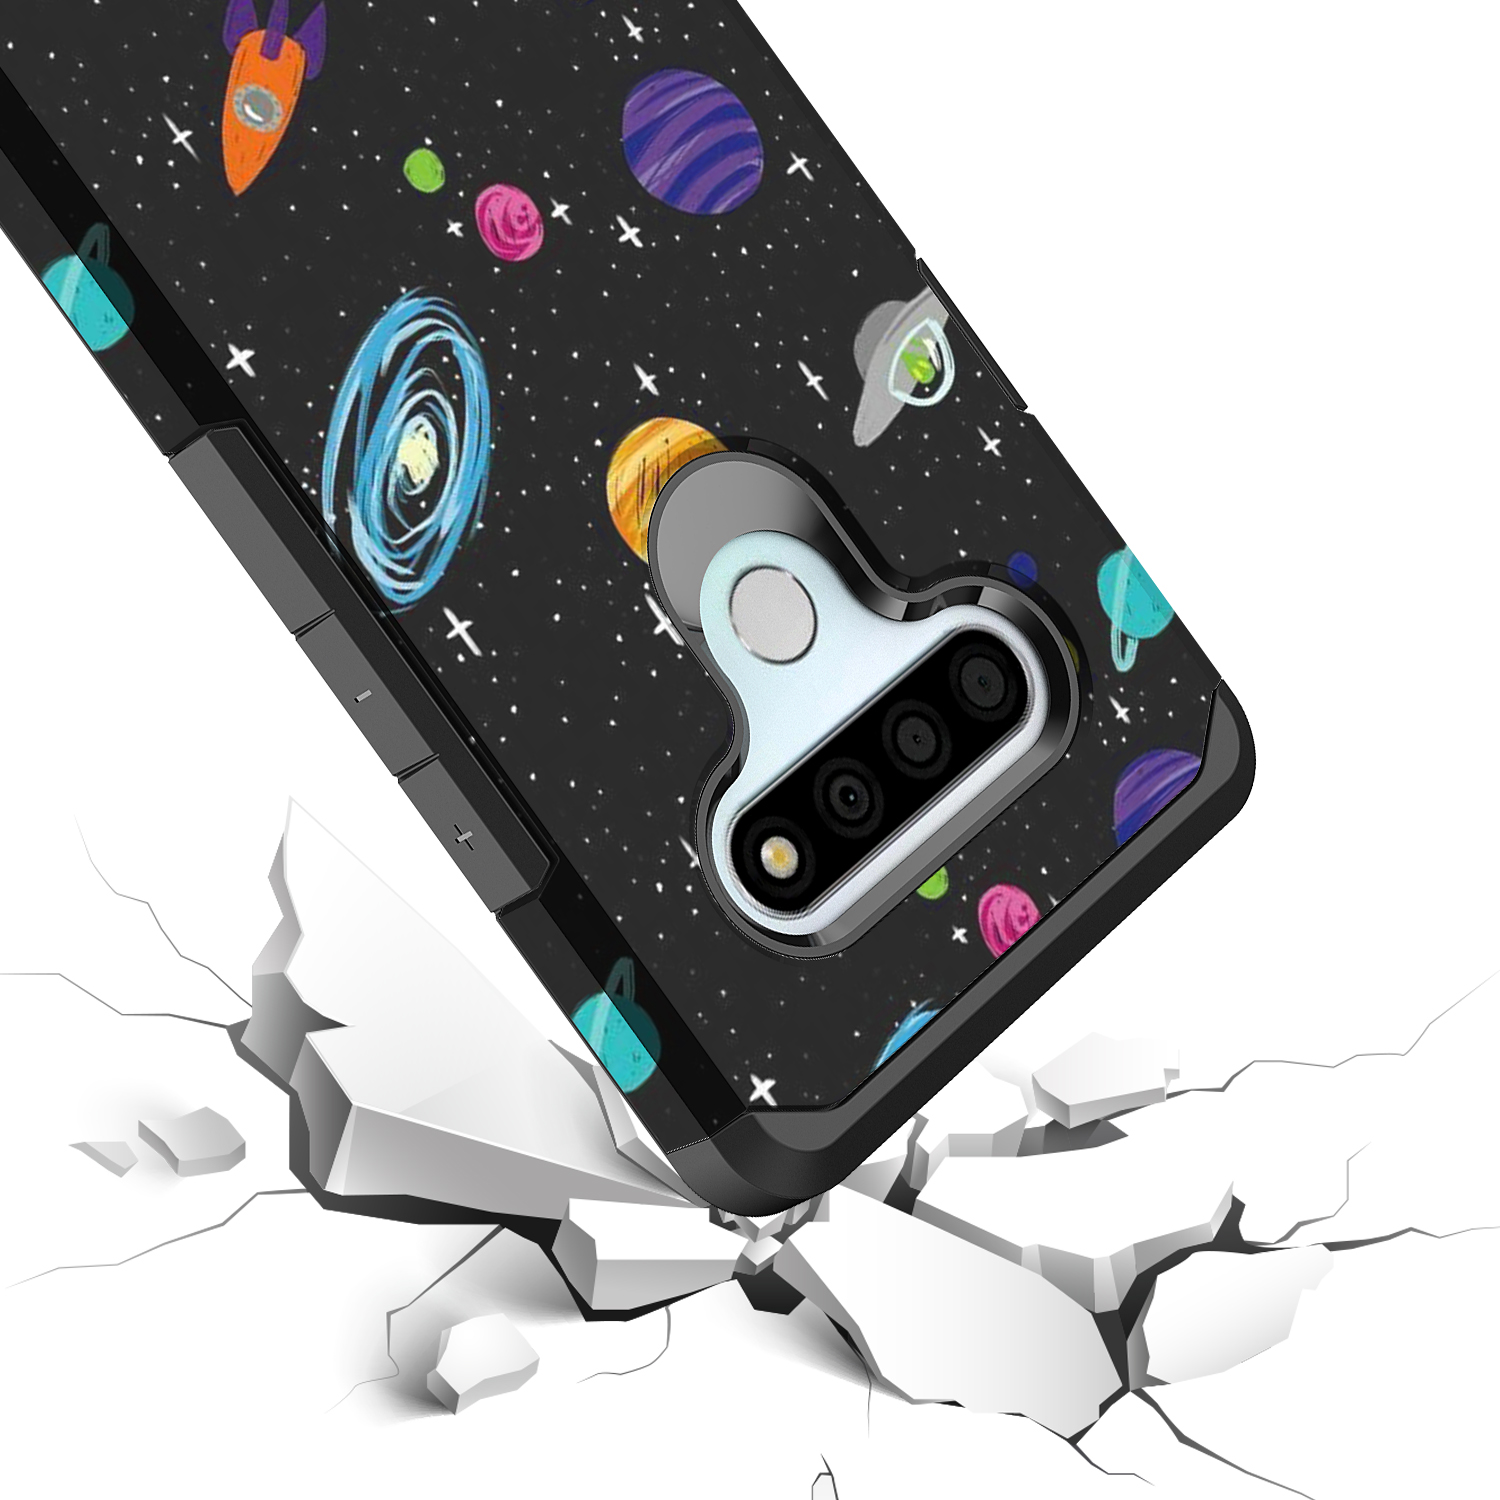 LG Stylo 6 Case, LG Stylo 6+ Case, KAESAR Hybird Drop Protection Sleek Slim Dual Layer Shockproof Colorful Graphic Armor Case For LG Stylo 6 / LG Stylo 6 Plus (Space) - image 5 of 5